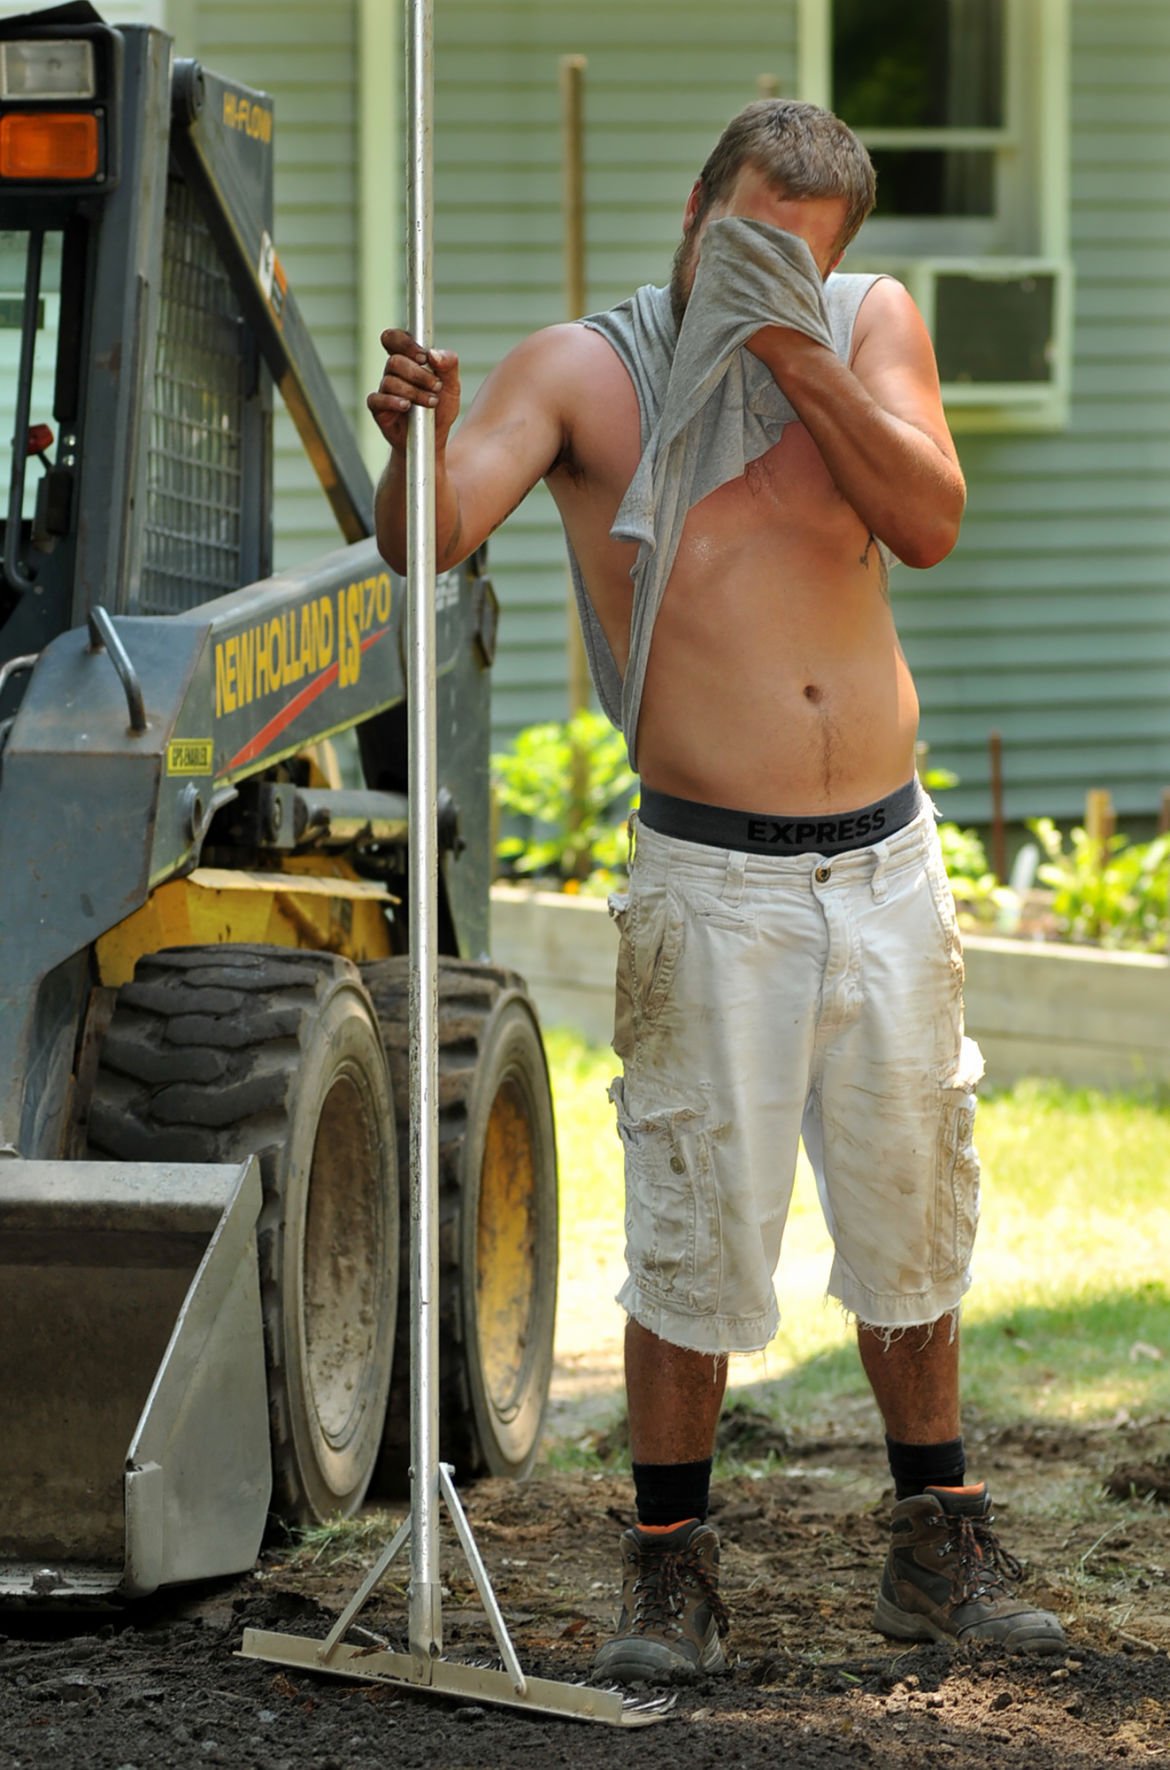 For Landscapers Heavy Heat Is All Part Of The Job Local News